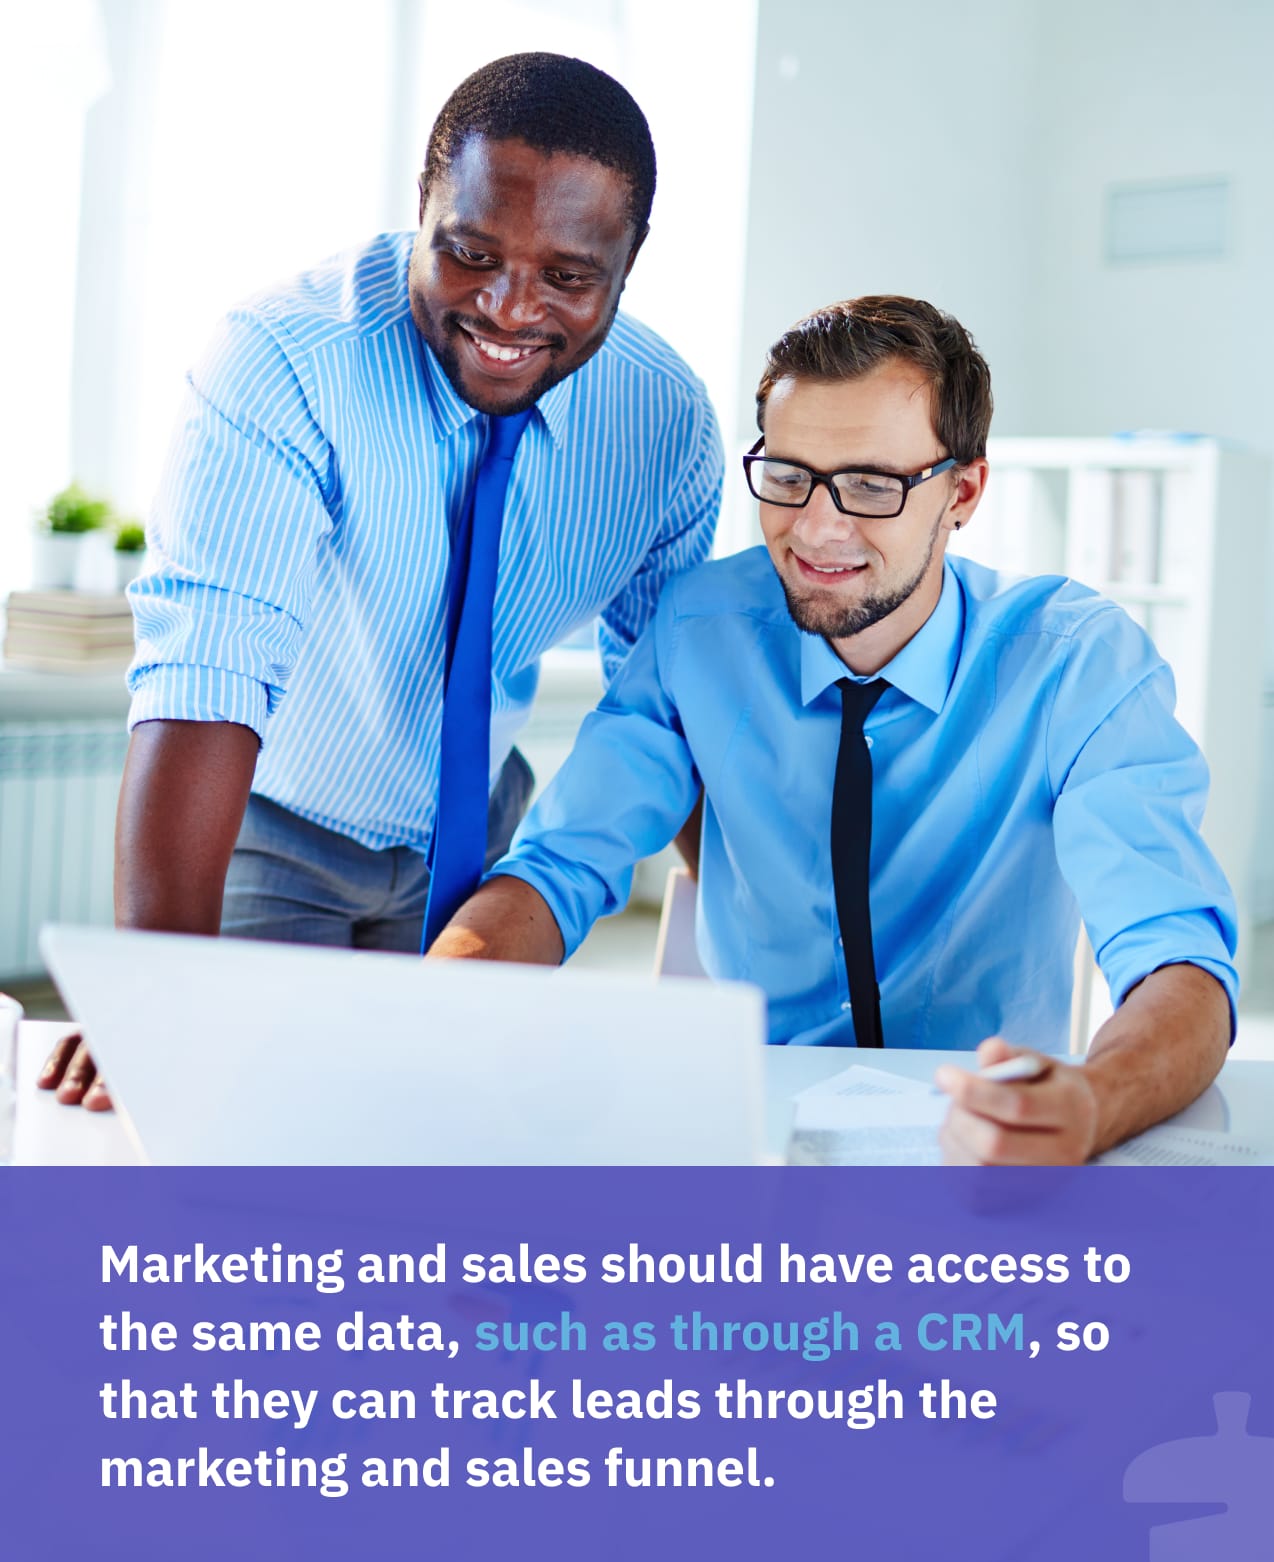 Ensure sales and marketing have access to the same data